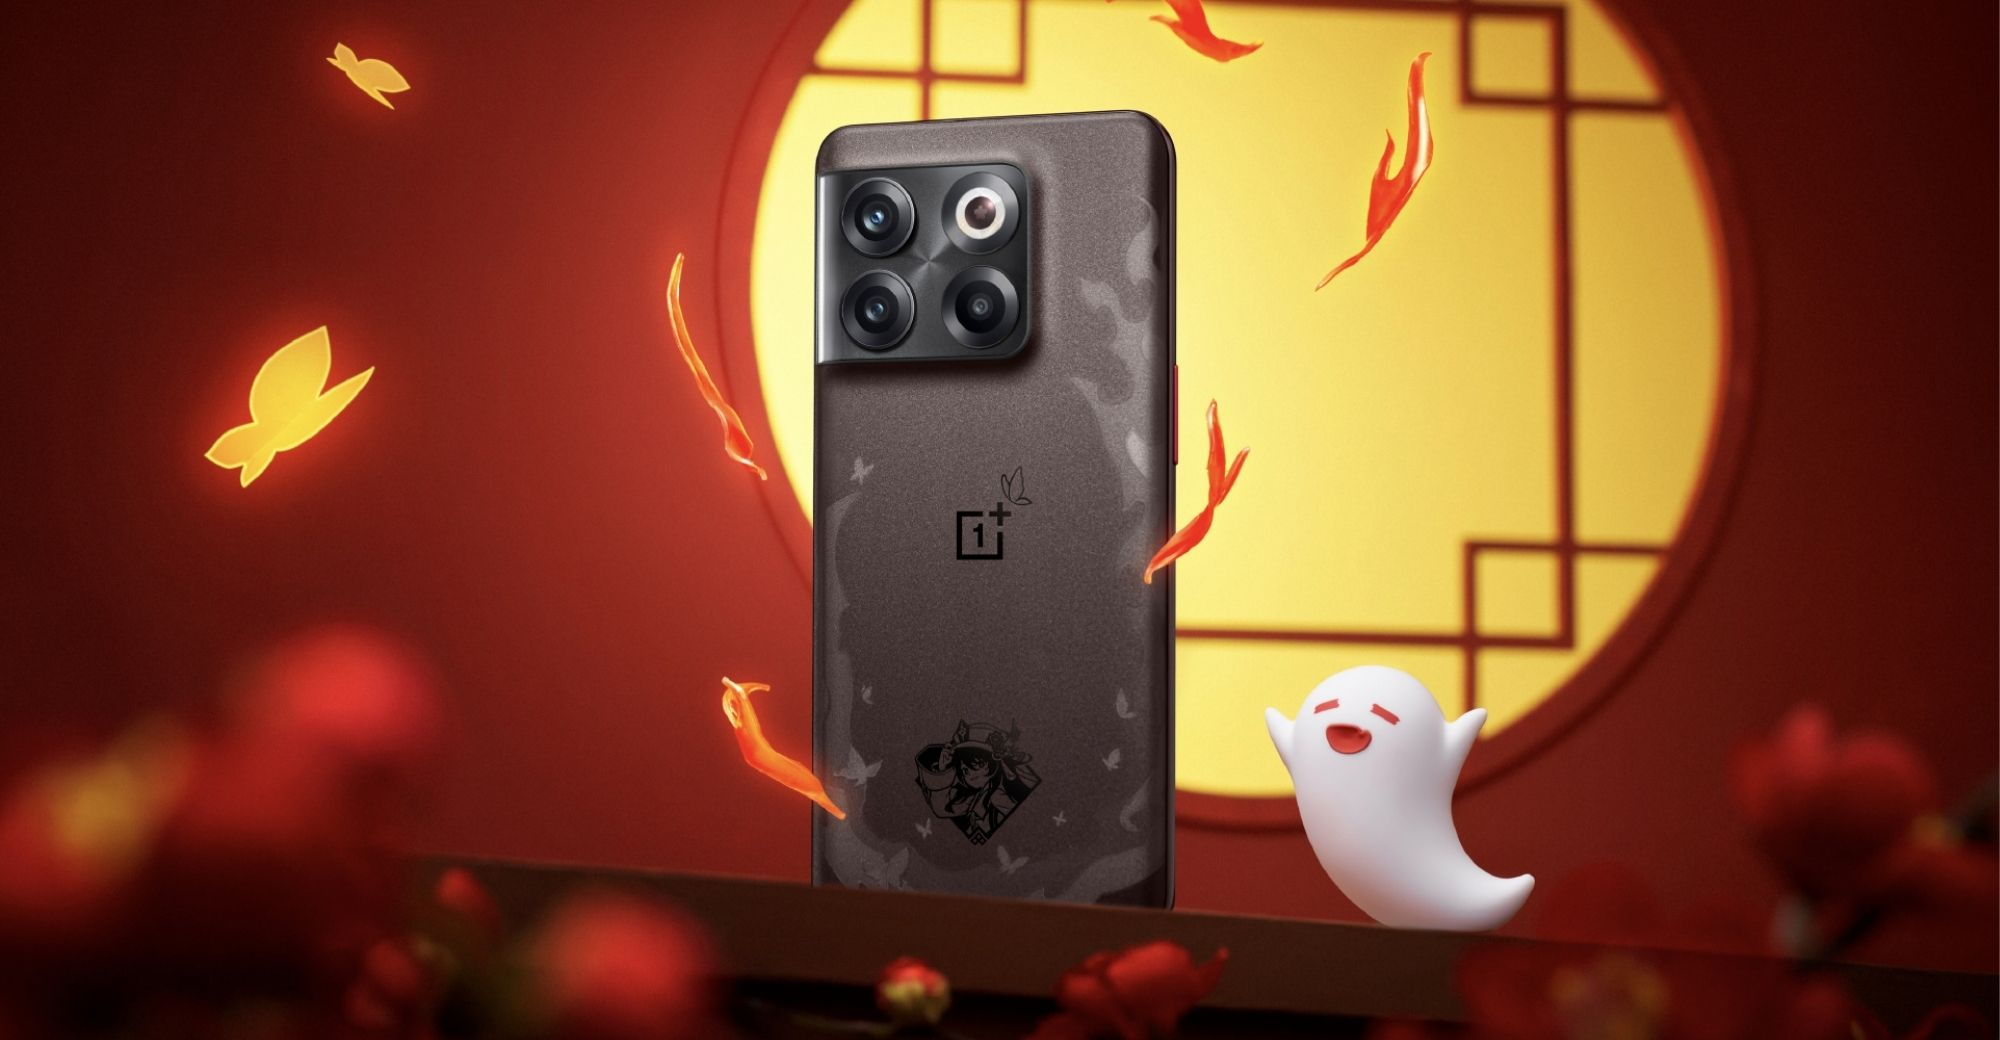 OnePlus launched Genshin Impact Limited Edition OnePlus Ace Pro